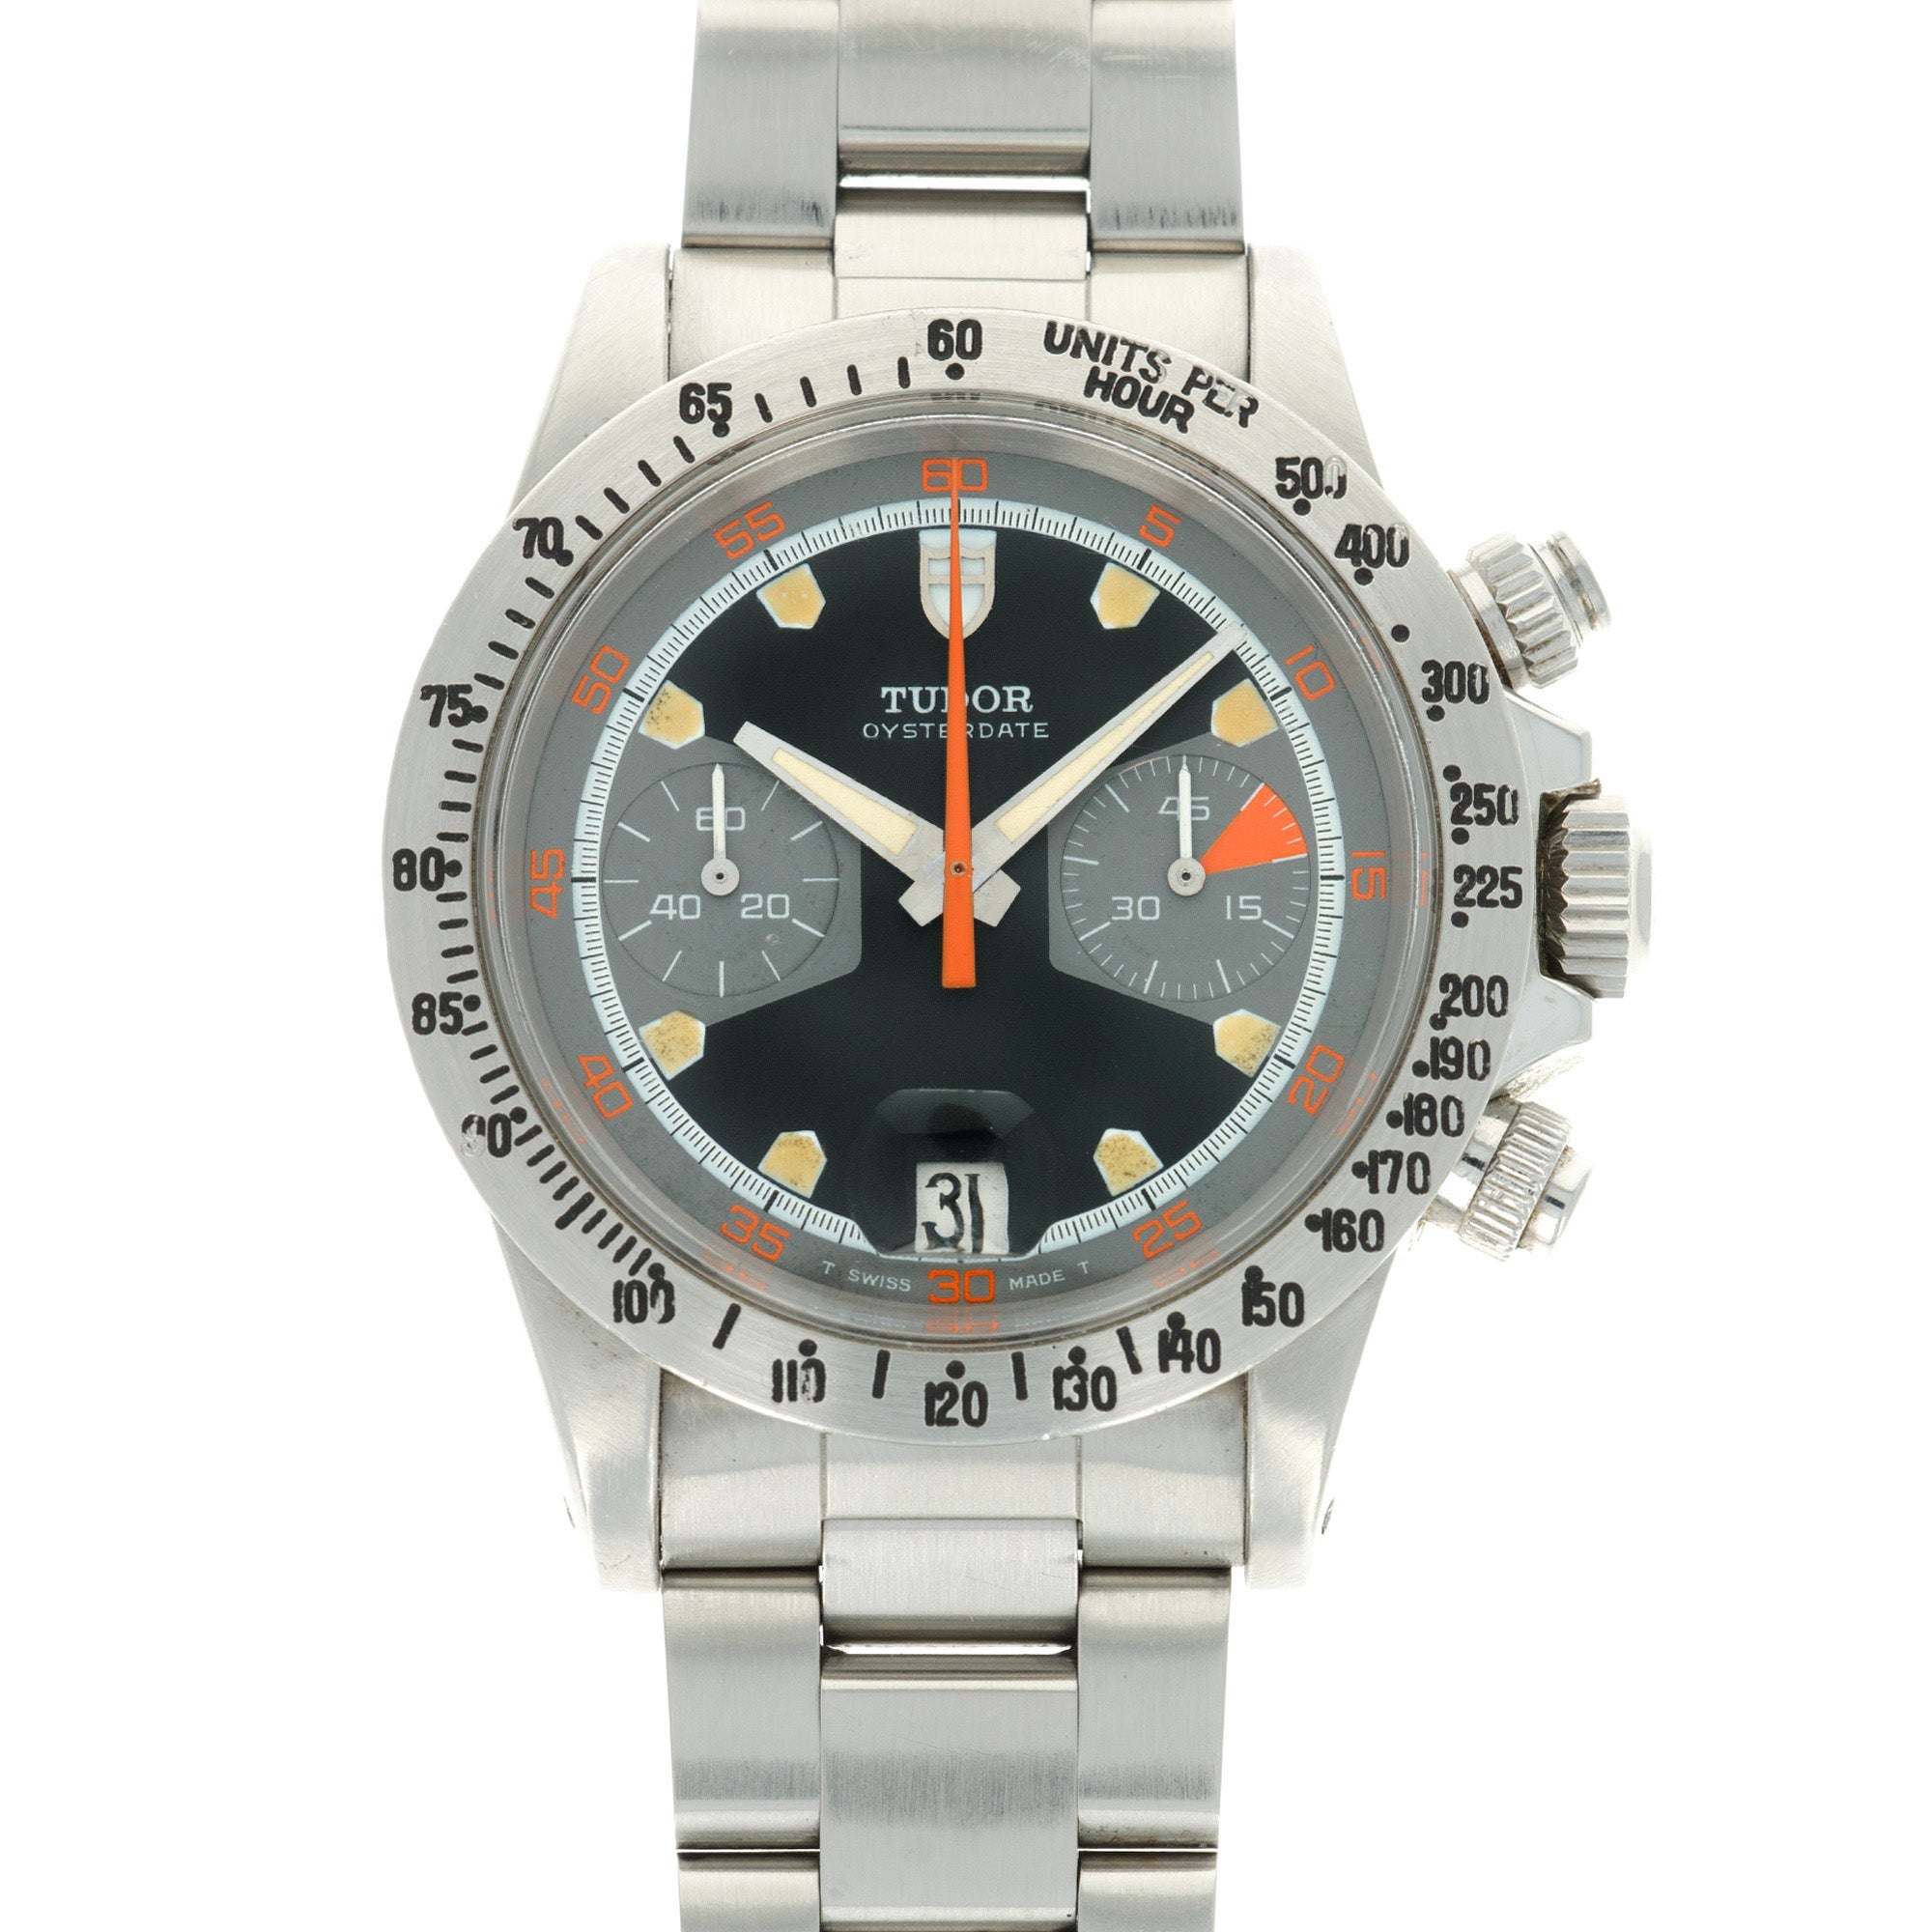 Tudor - Tudor Monte Carlo Home Plate Oyster Date Chronograph Ref. 7032 - The Keystone Watches